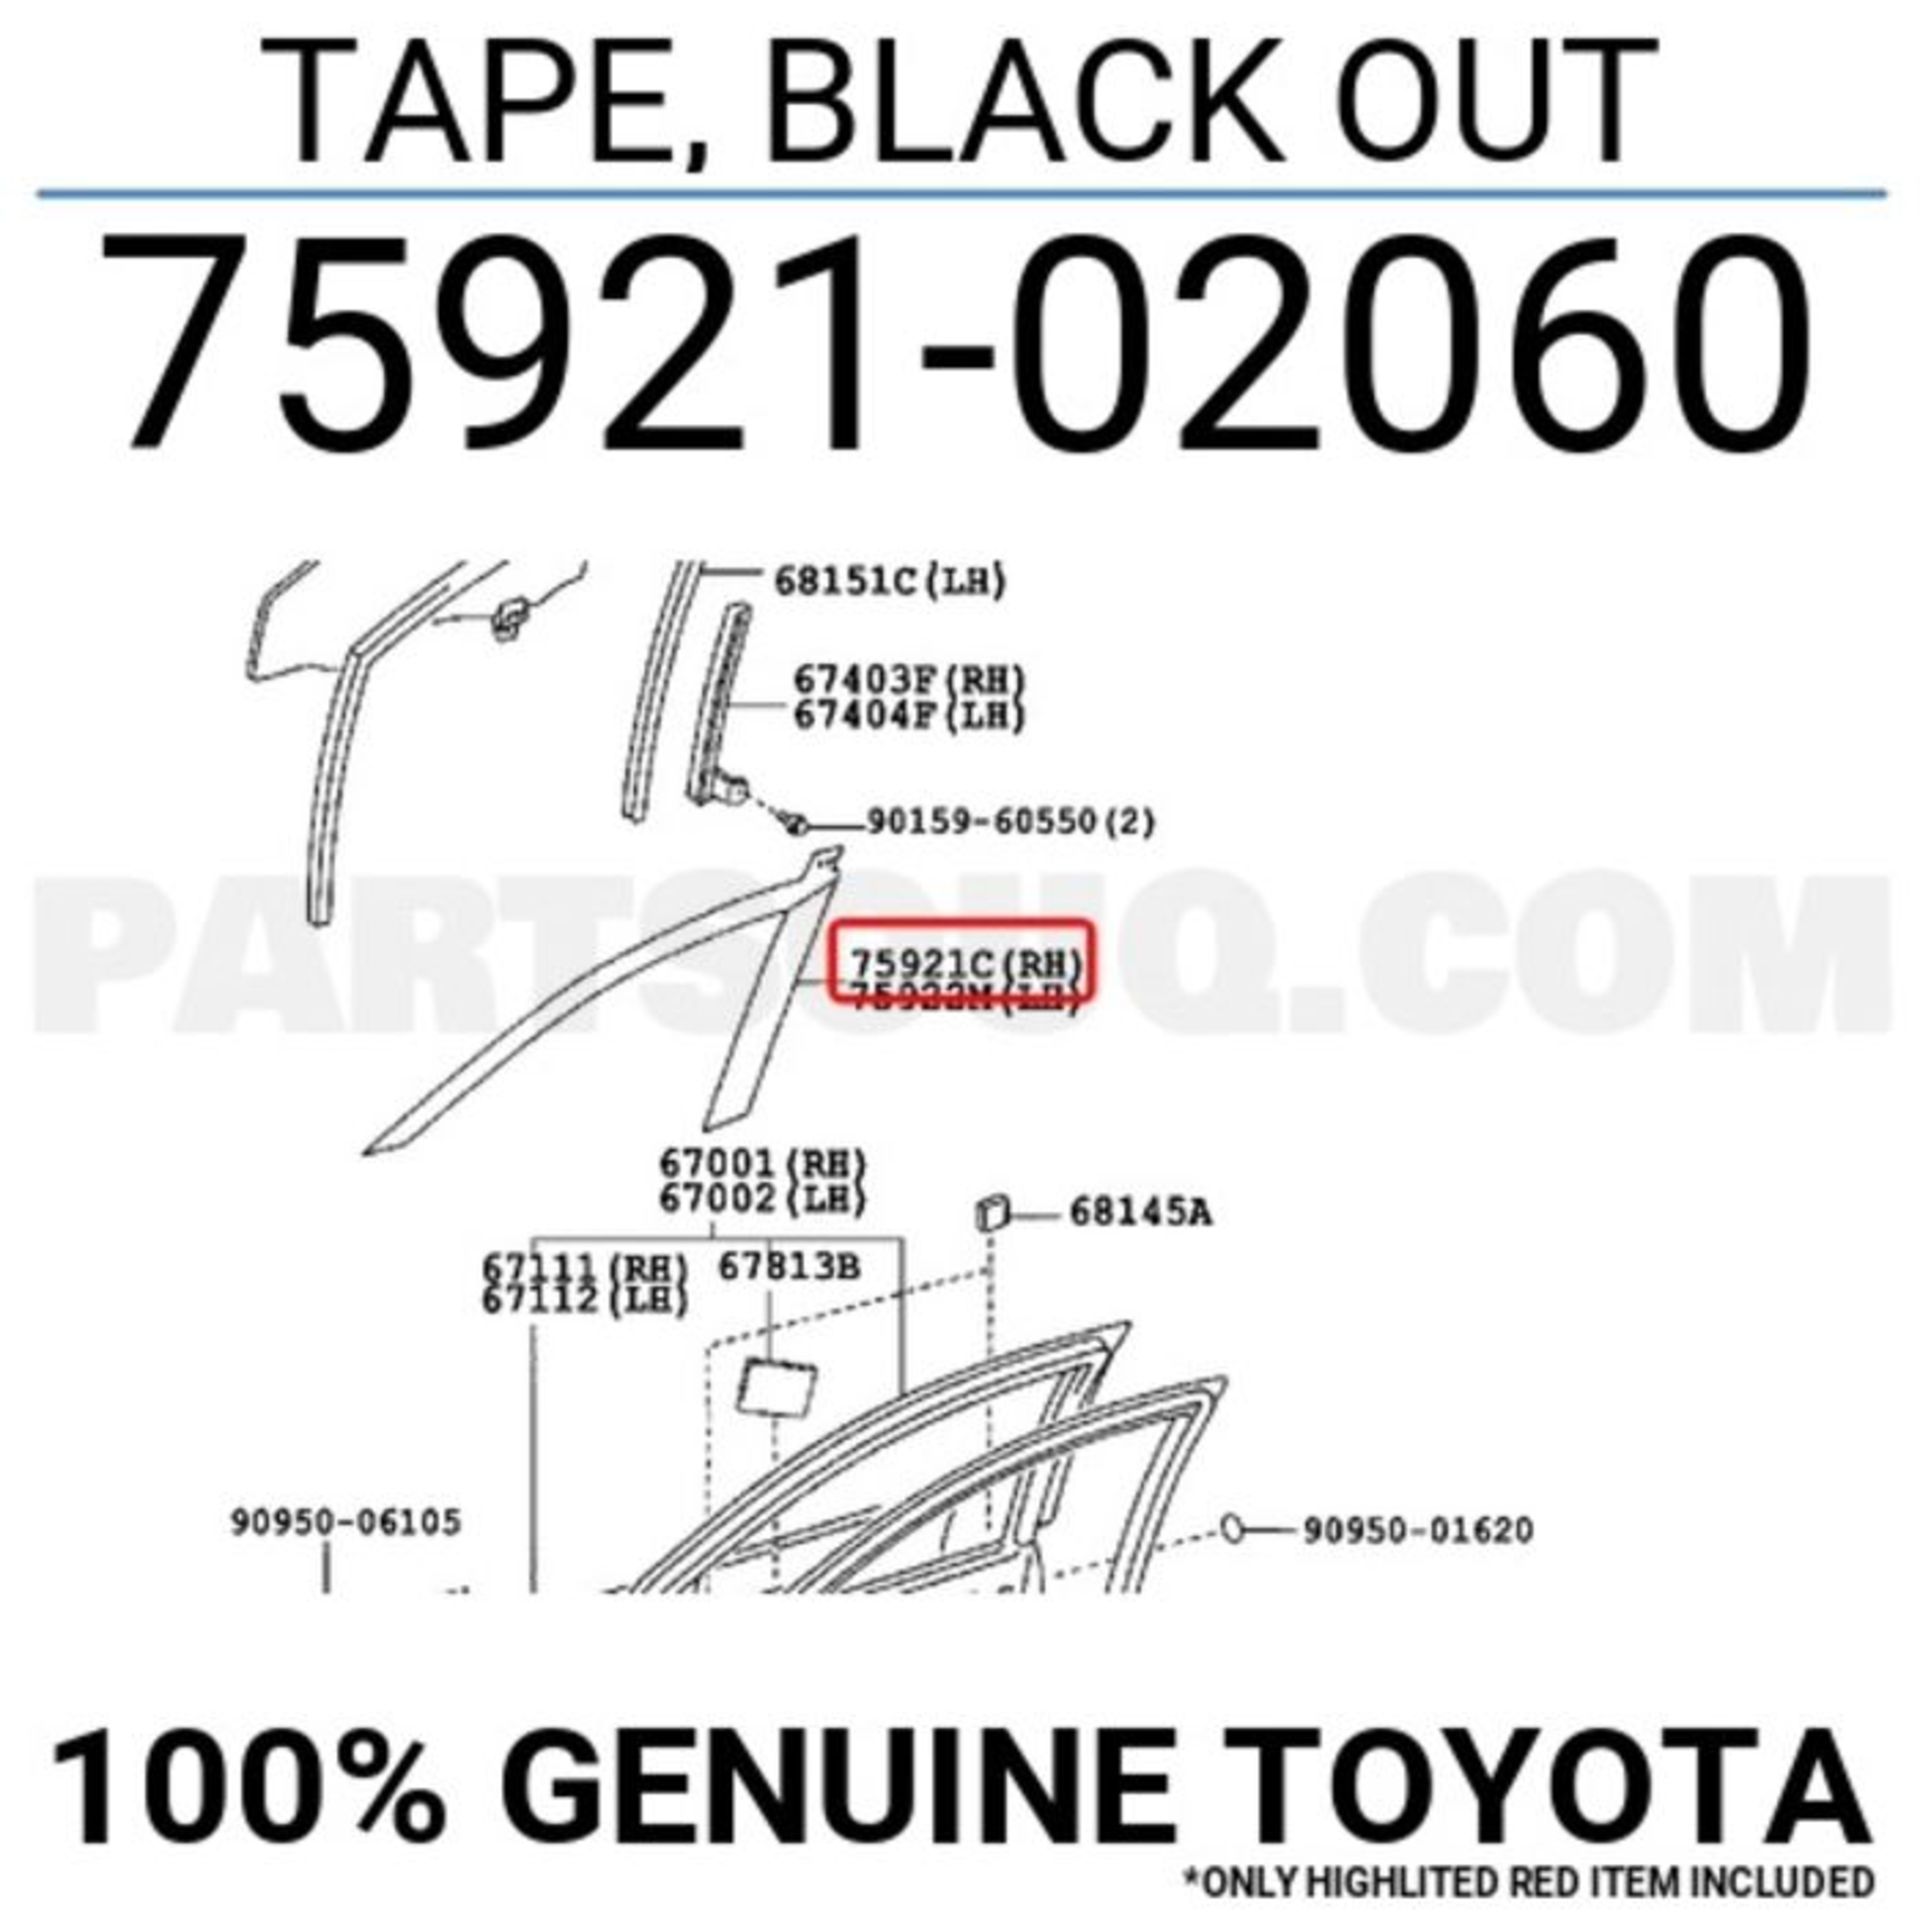 1 LOT TO CONTAIN 2 BOXES OF 12 3M, TOYOTA COROLLA BLACK OUT TAPE FOR FRONT RH SIDE WINDOW FRAME/DOOR